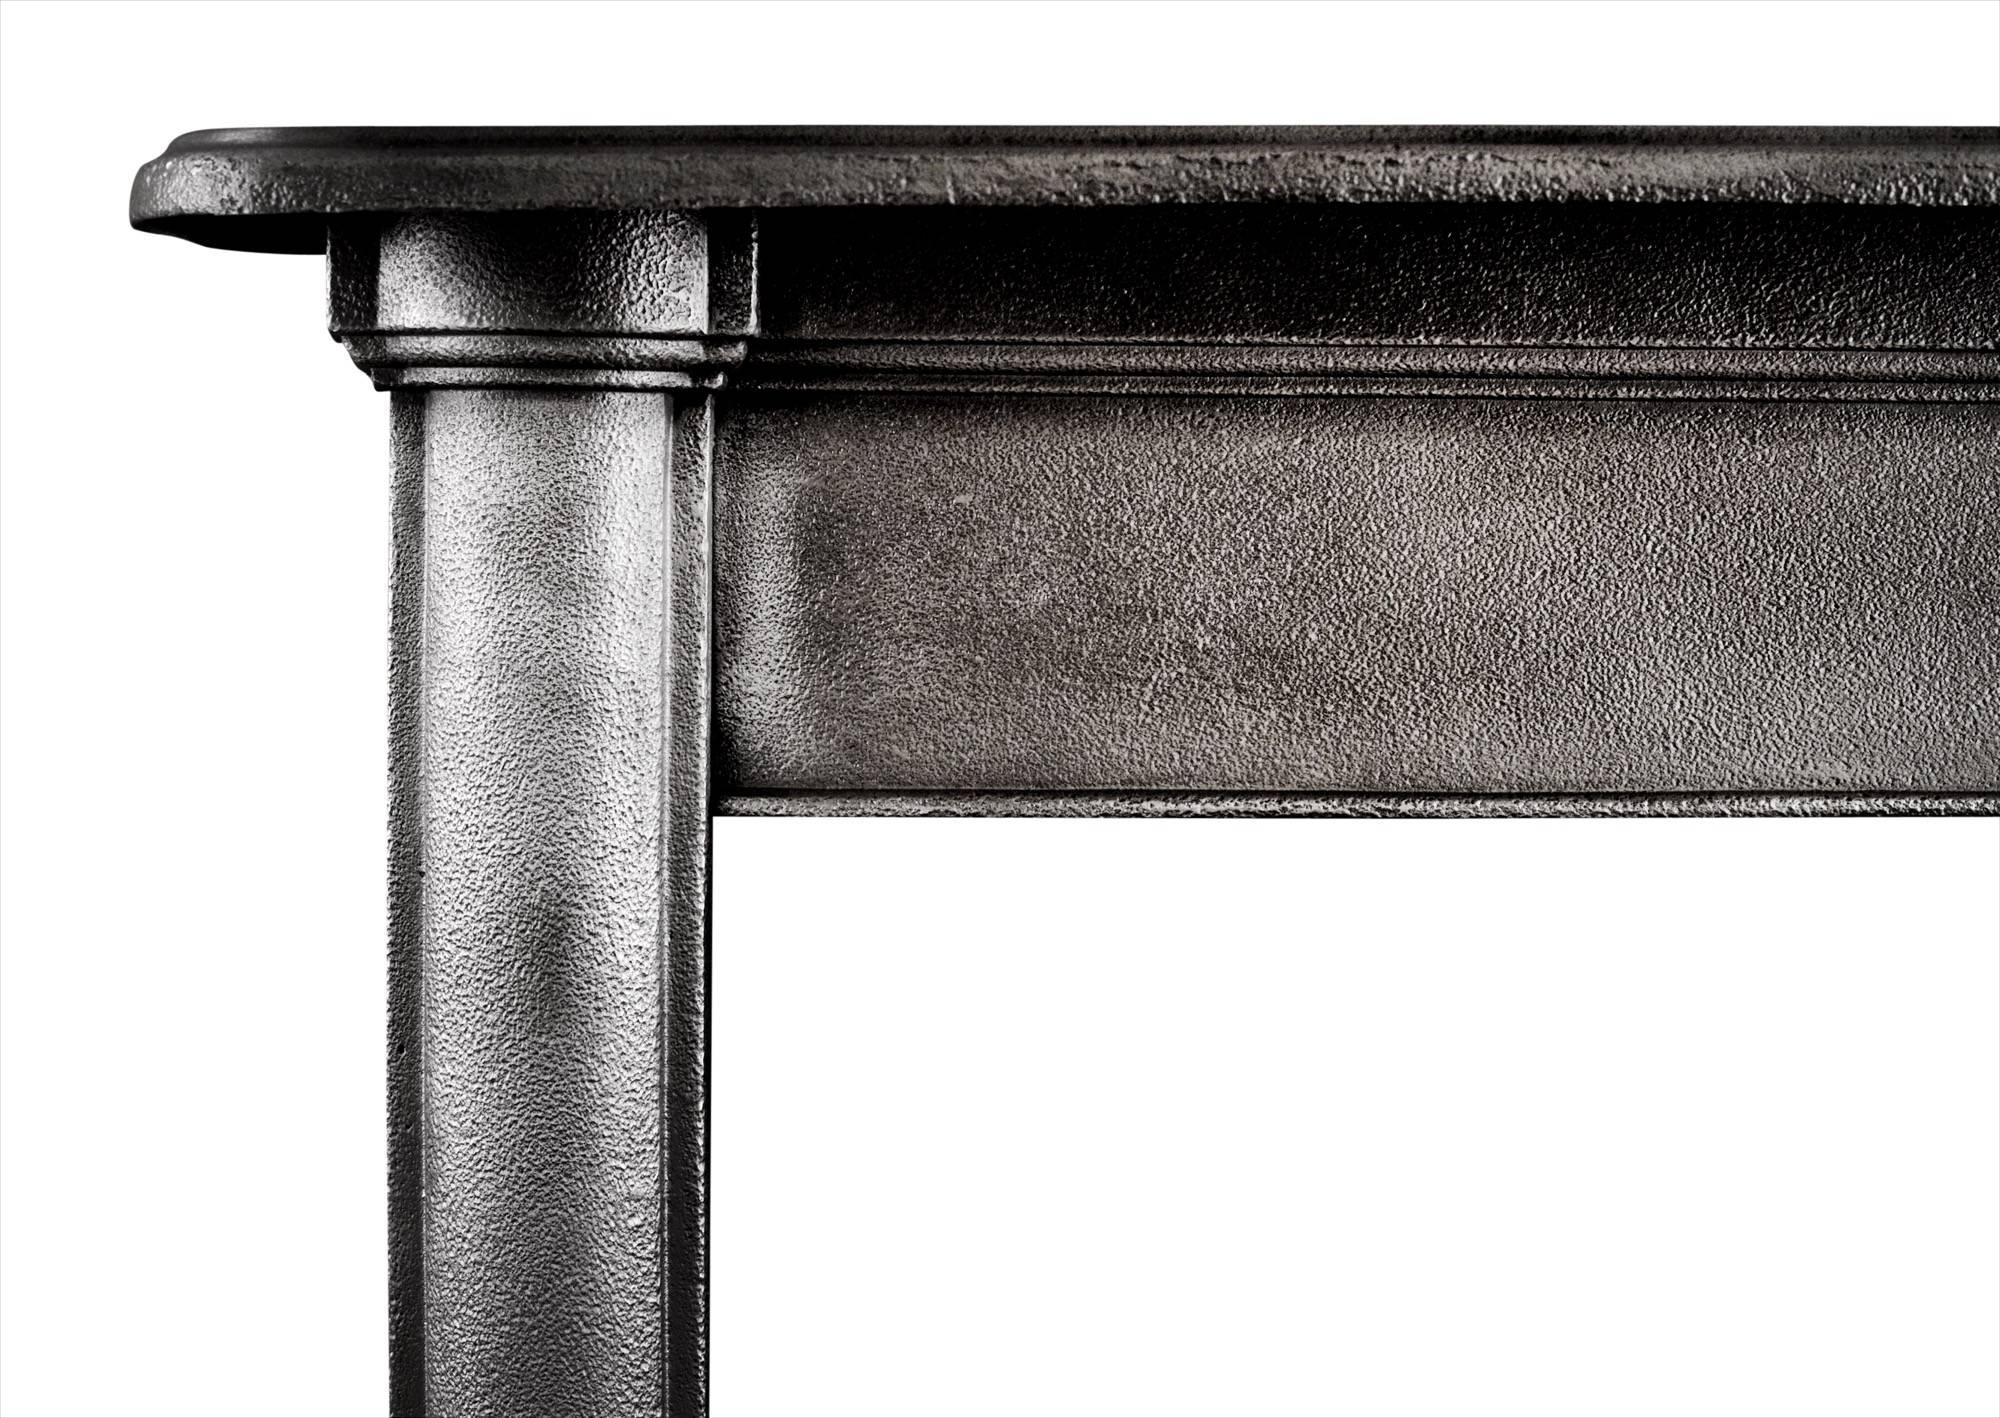 A simple, yet elegant polished cast iron fireplace. The half rounded pilasters surmounted by plain frieze and molded shelf, English, circa 1900.

Measures: 
Shelf width - 1300 mm / 51 1/8 in
Overall height - 1175 mm / 46 1/4 in
Opening height - 955